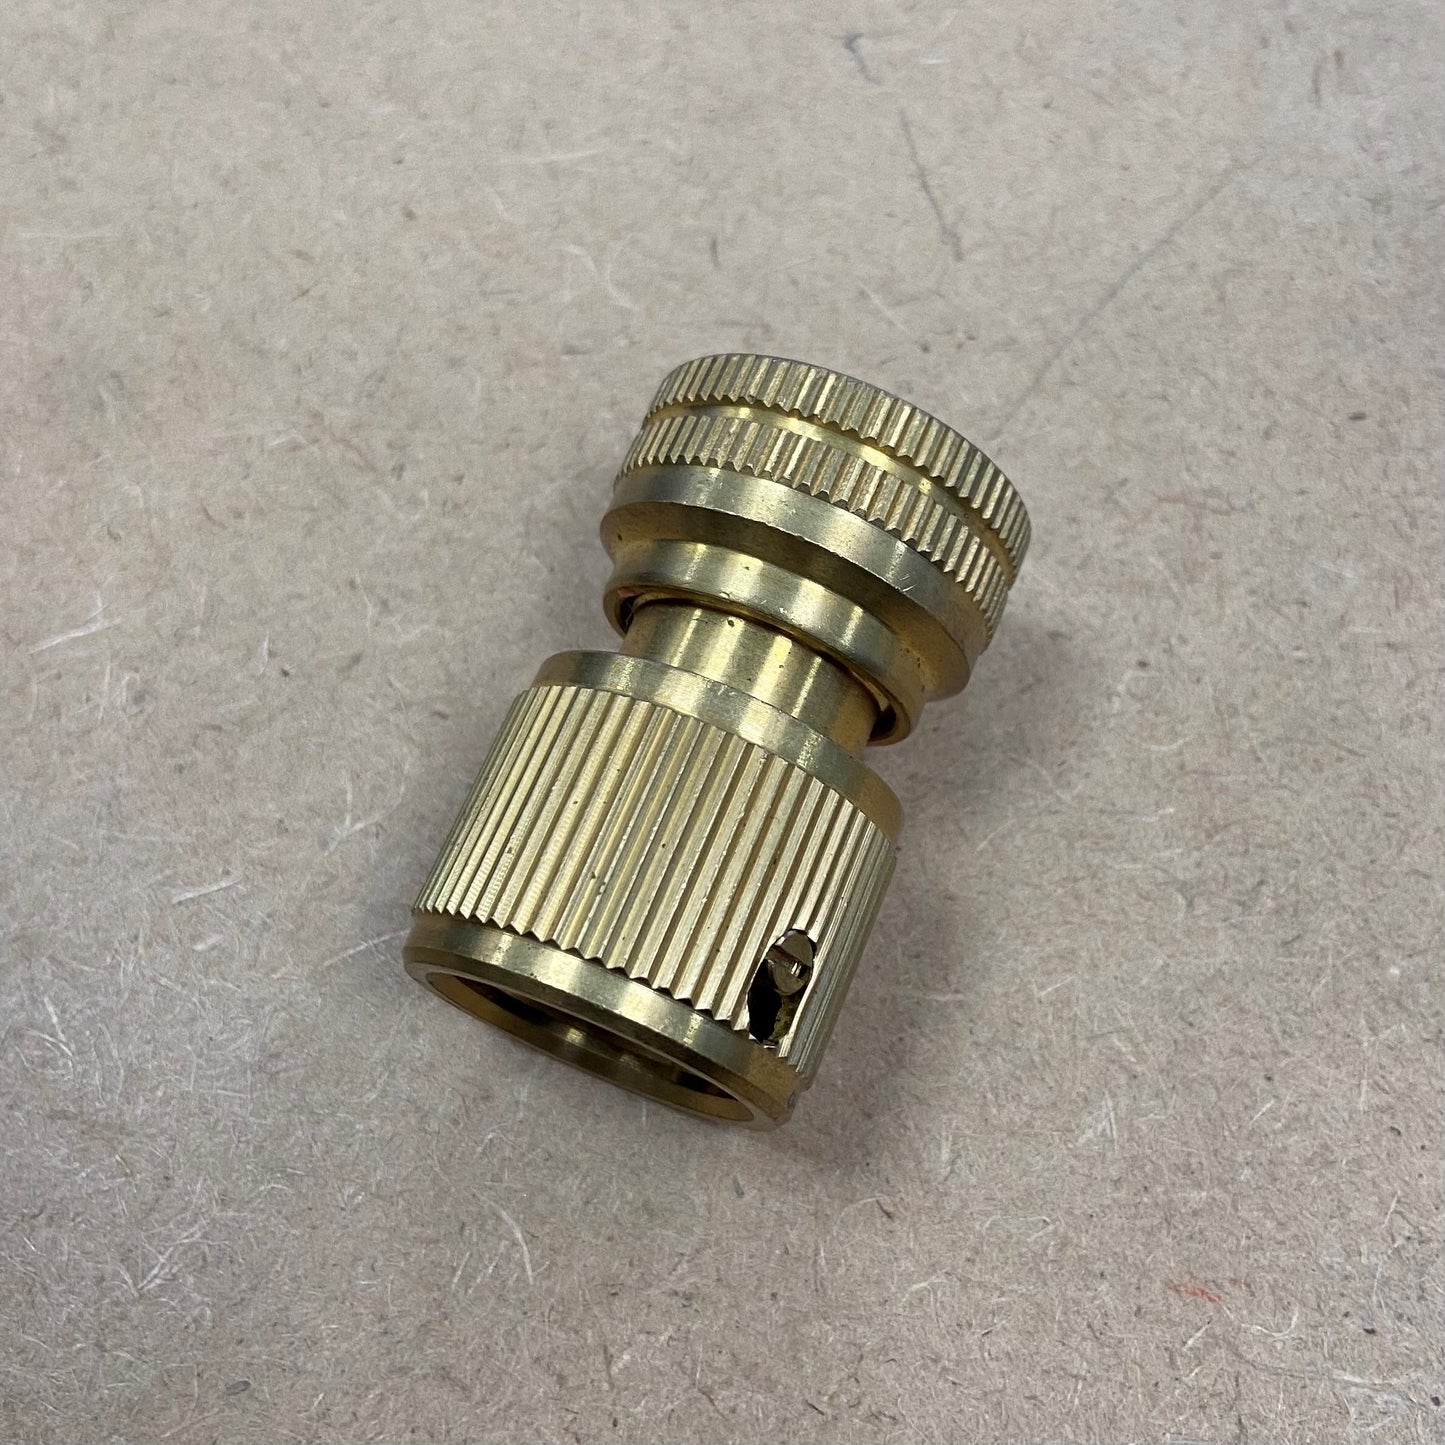 Brass Stop Connector